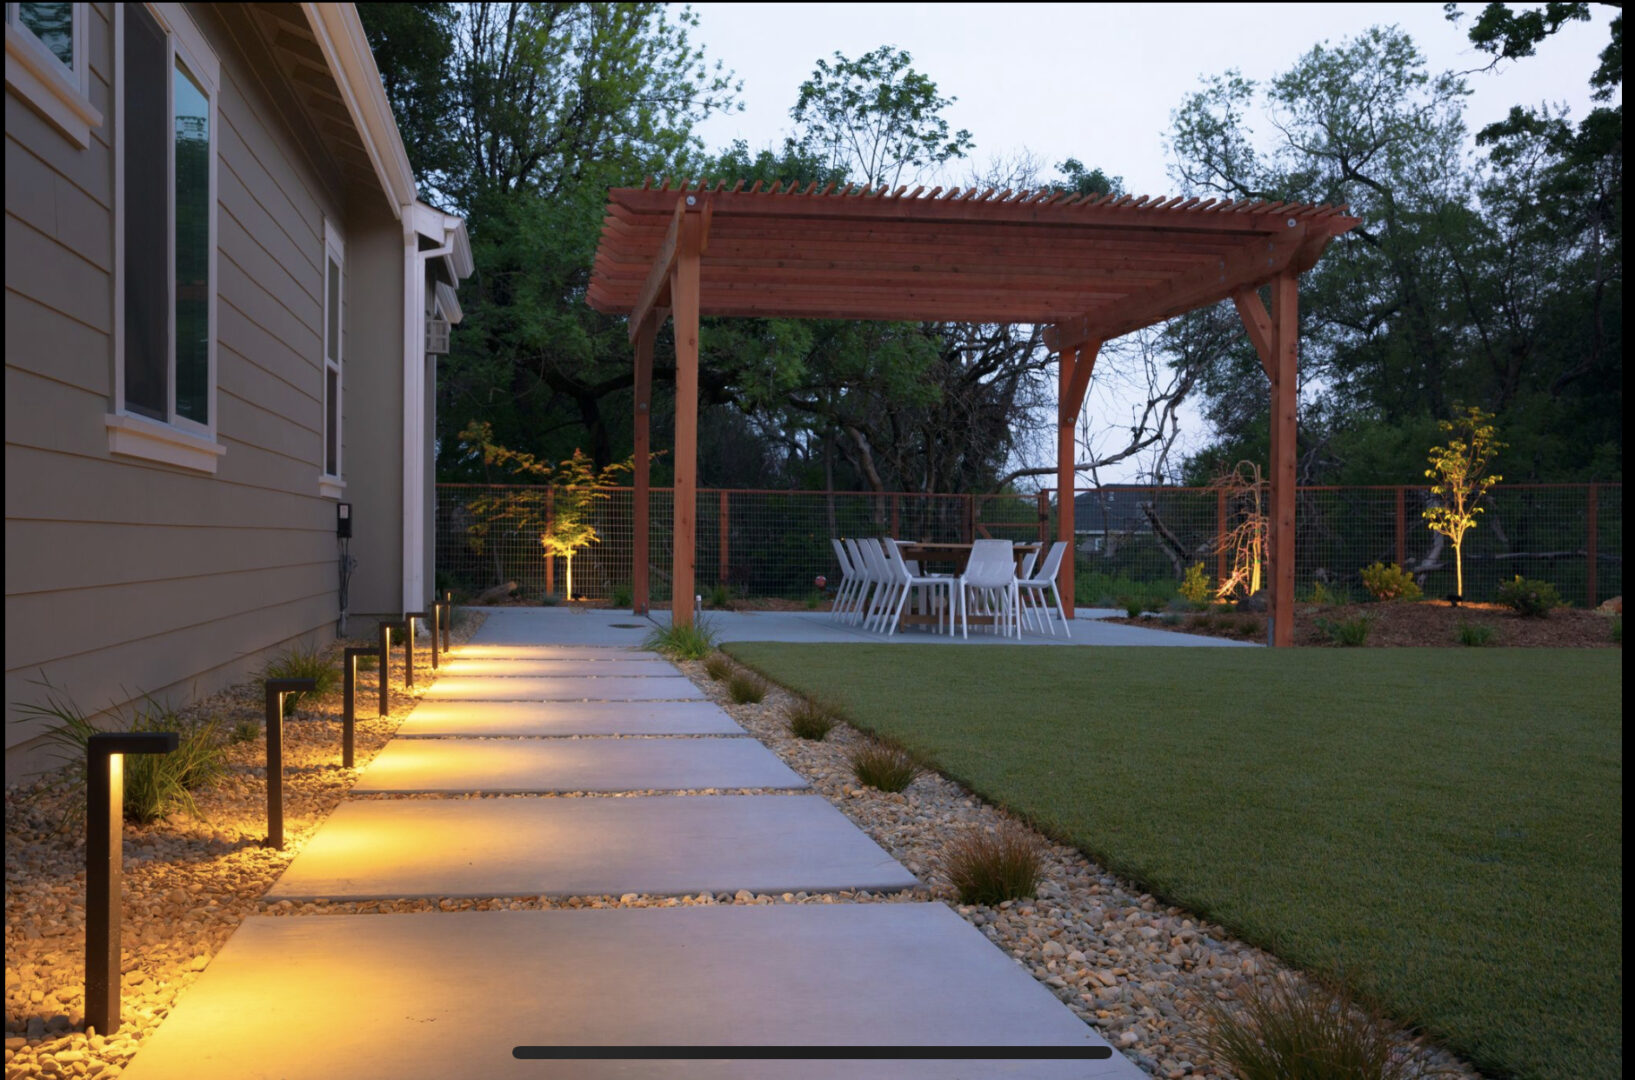 Artificial grass, gazebo, path lights, landscaping by Guys Yard Design in Sonoma, CA